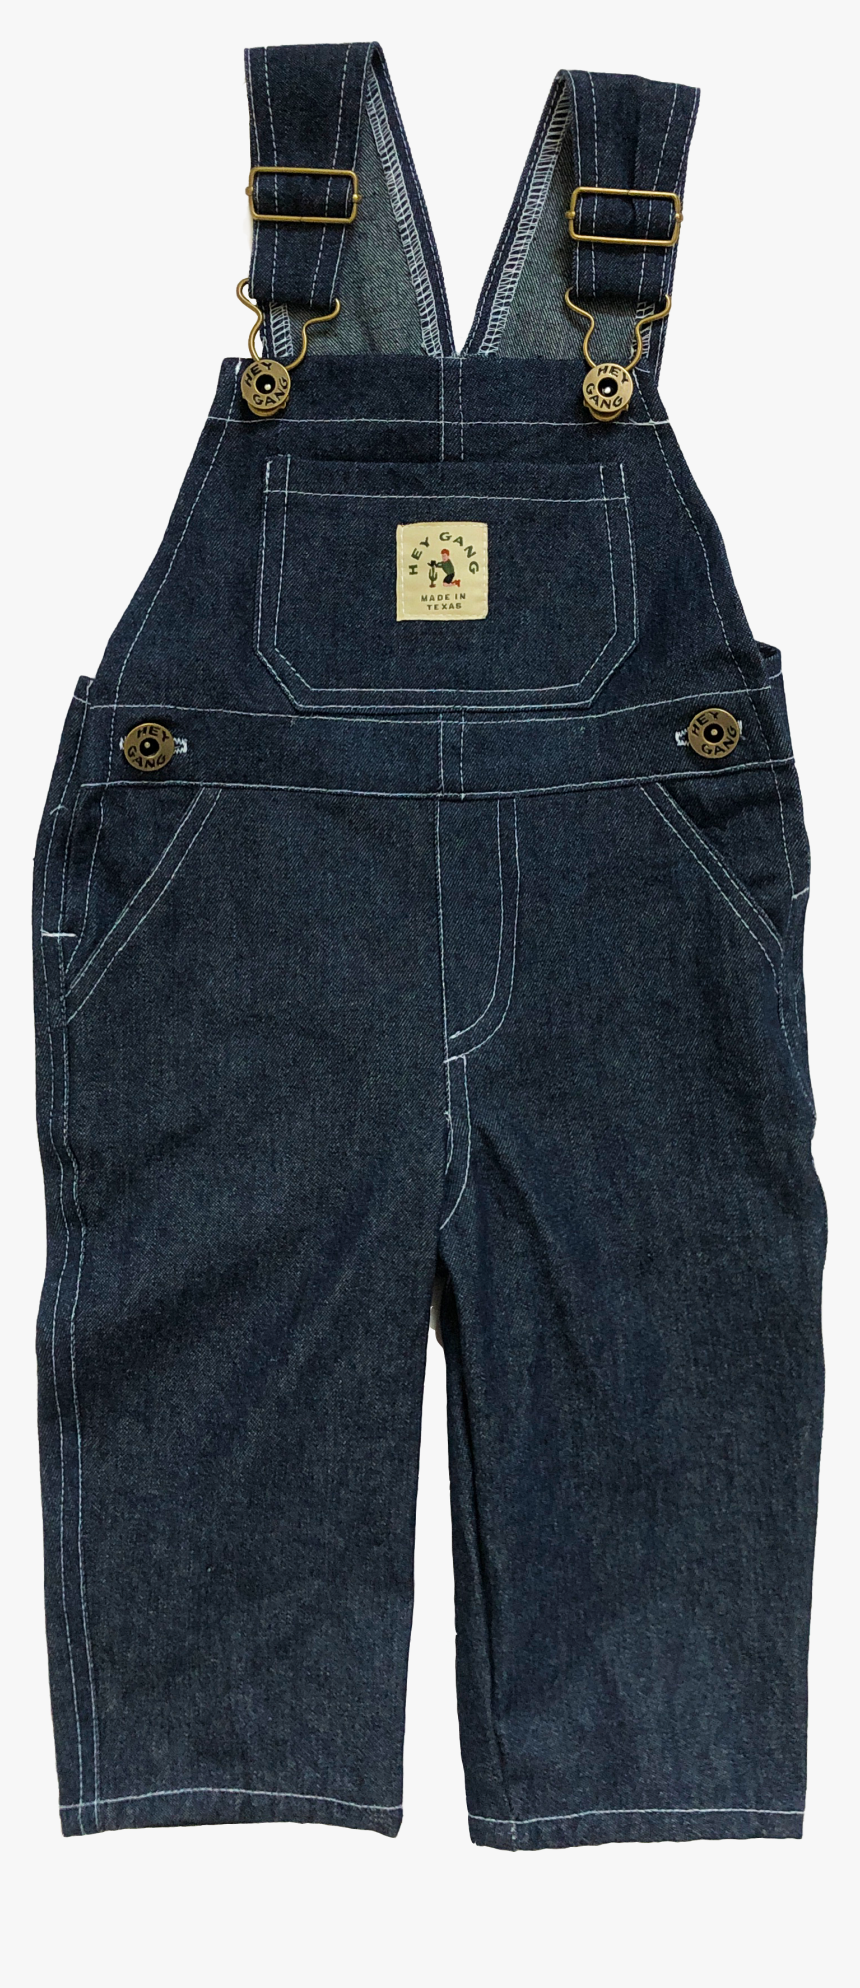 Kids Hey Gang Overalls - One-piece Garment, HD Png Download, Free Download